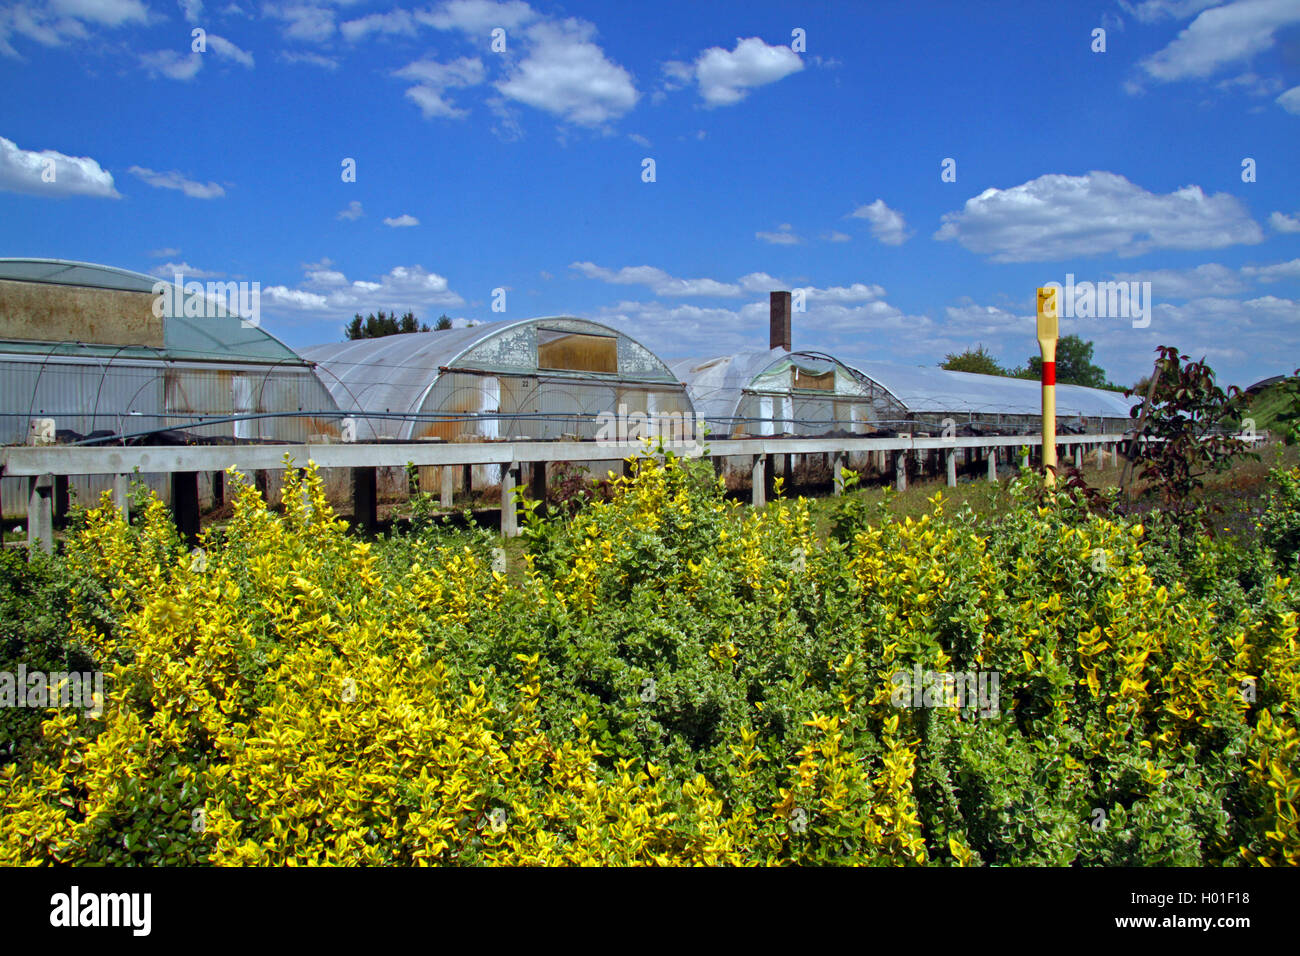 greenhouses of a garden centre, Germany Stock Photo